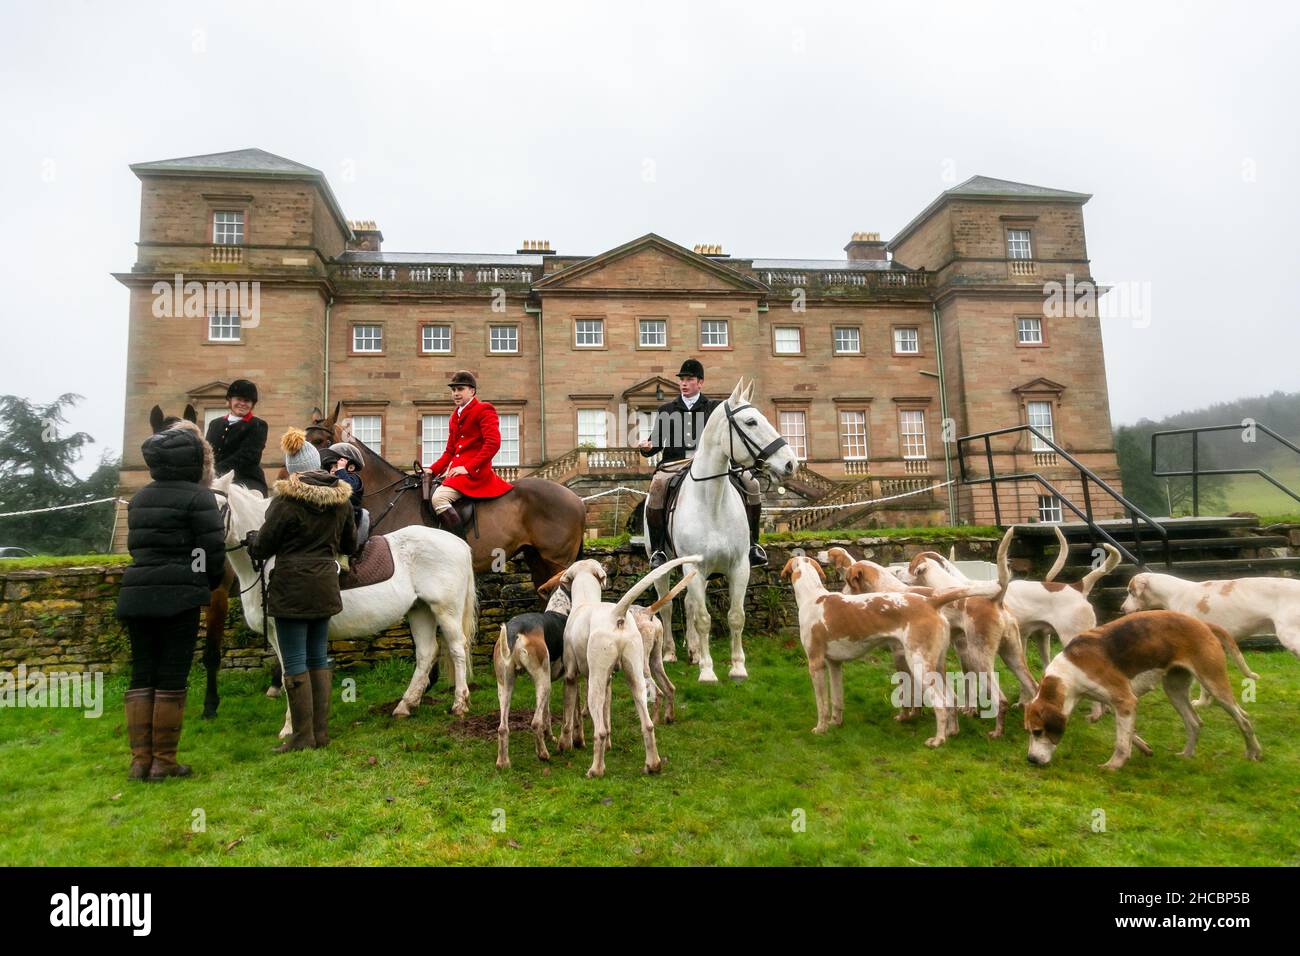 Hagley, Worcestershire, UK. 27th Dec, 2021. Horses and hounds gather for the first meet at Hagley Hall since the Coronavirus pandemic. The Albrighton and Woodland Hunt meet annually at Hagley Hall in Worcestershire. Credit: Peter Lopeman/Alamy Live News Stock Photo